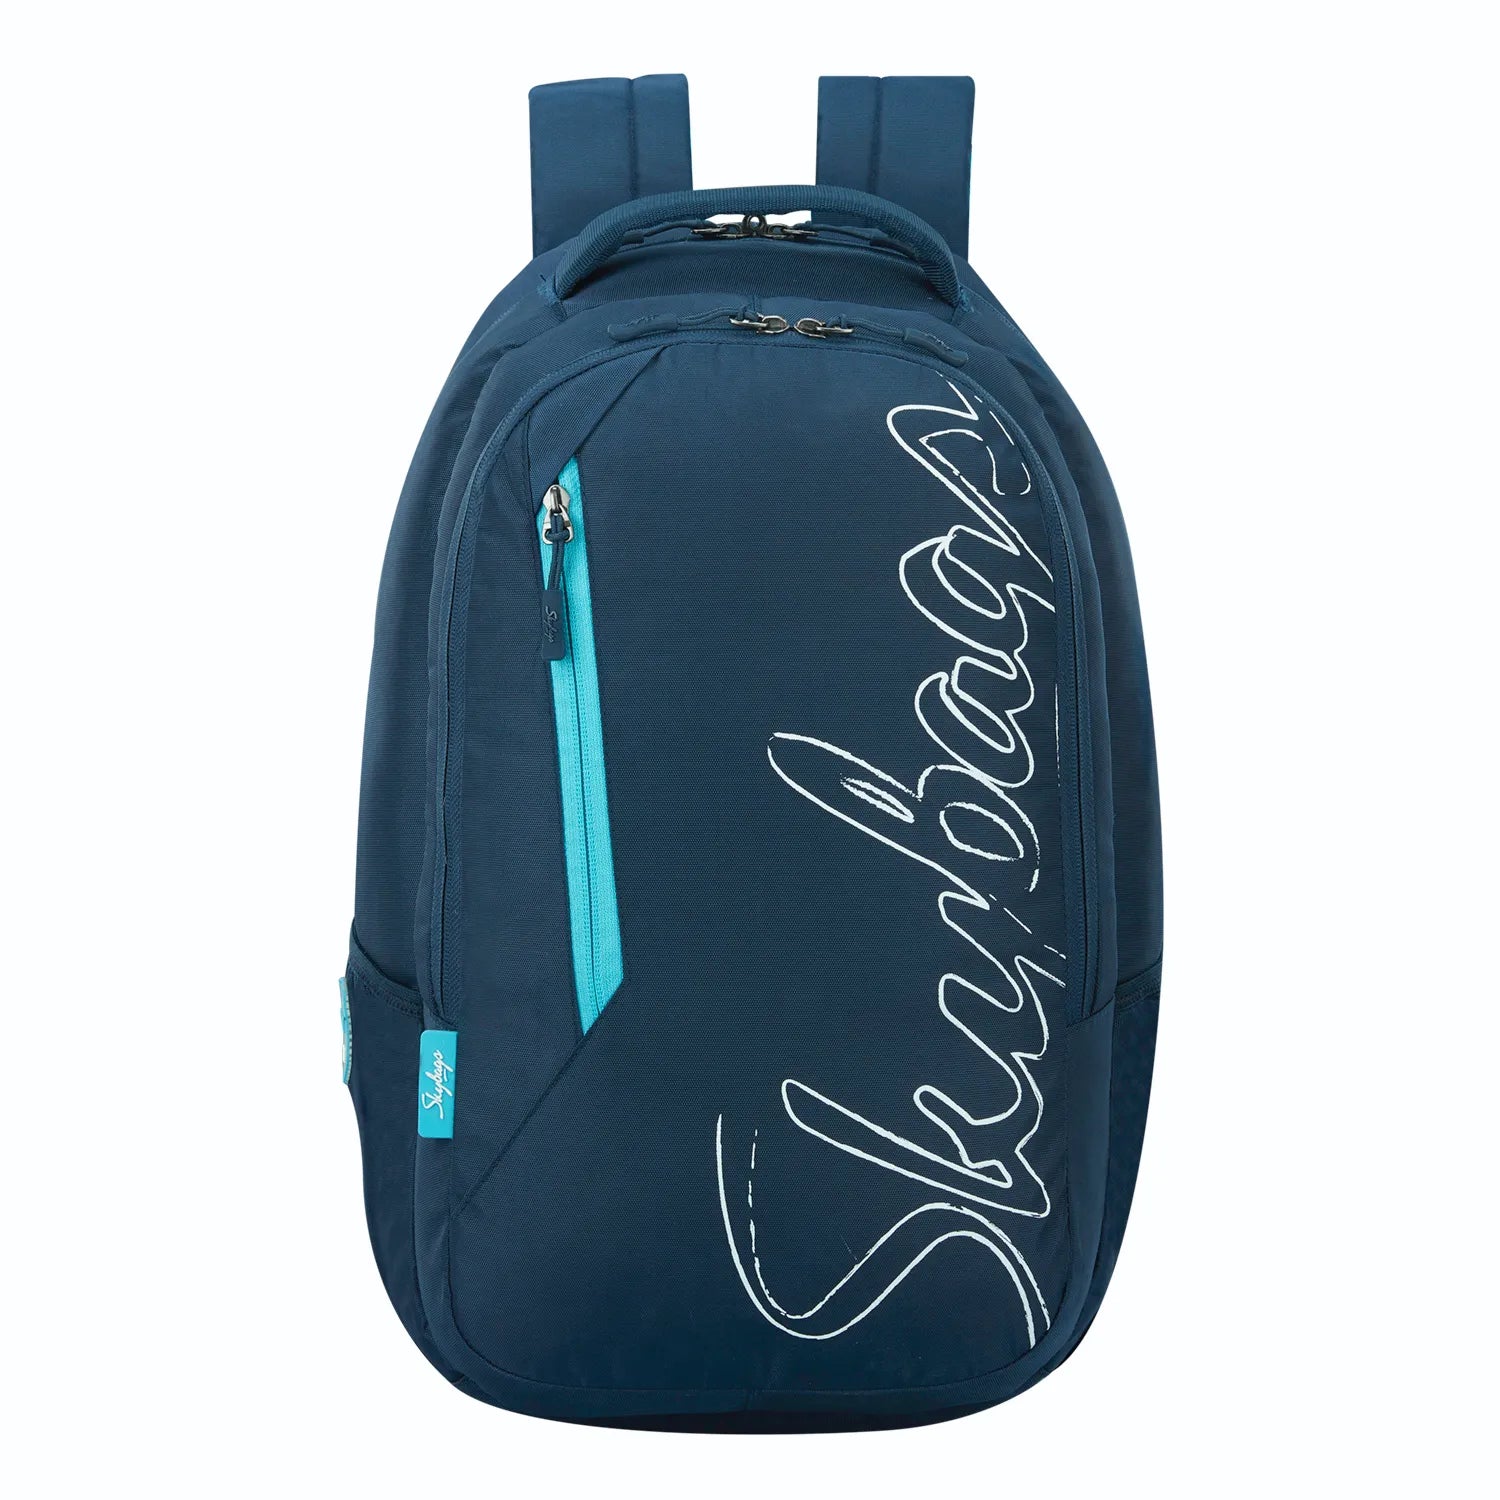 Skybags Savvie Laptop Backpack - Sunrise Trading Co.